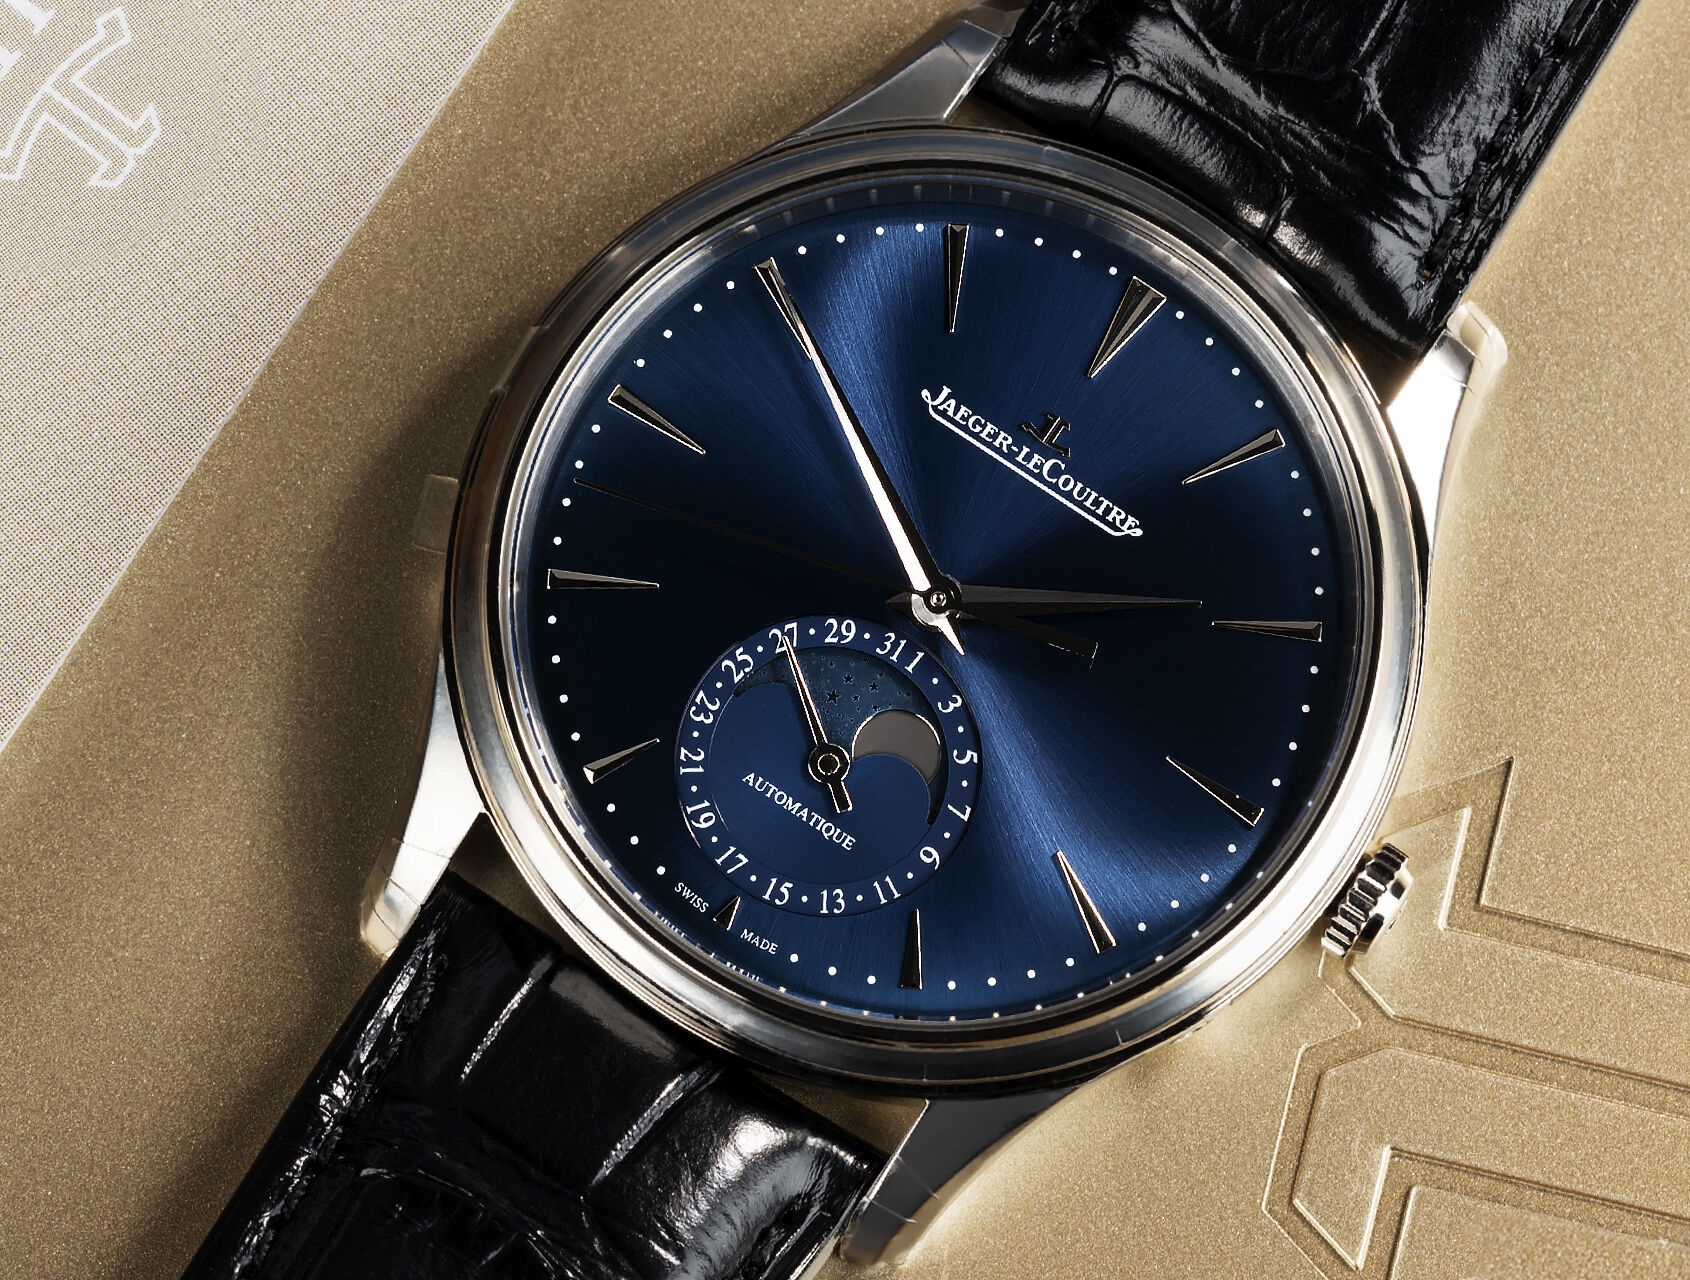 ref Q1368480 | Q1368480 - Fully Stickered | Jaeger-leCoultre Master ultra thingy Moon